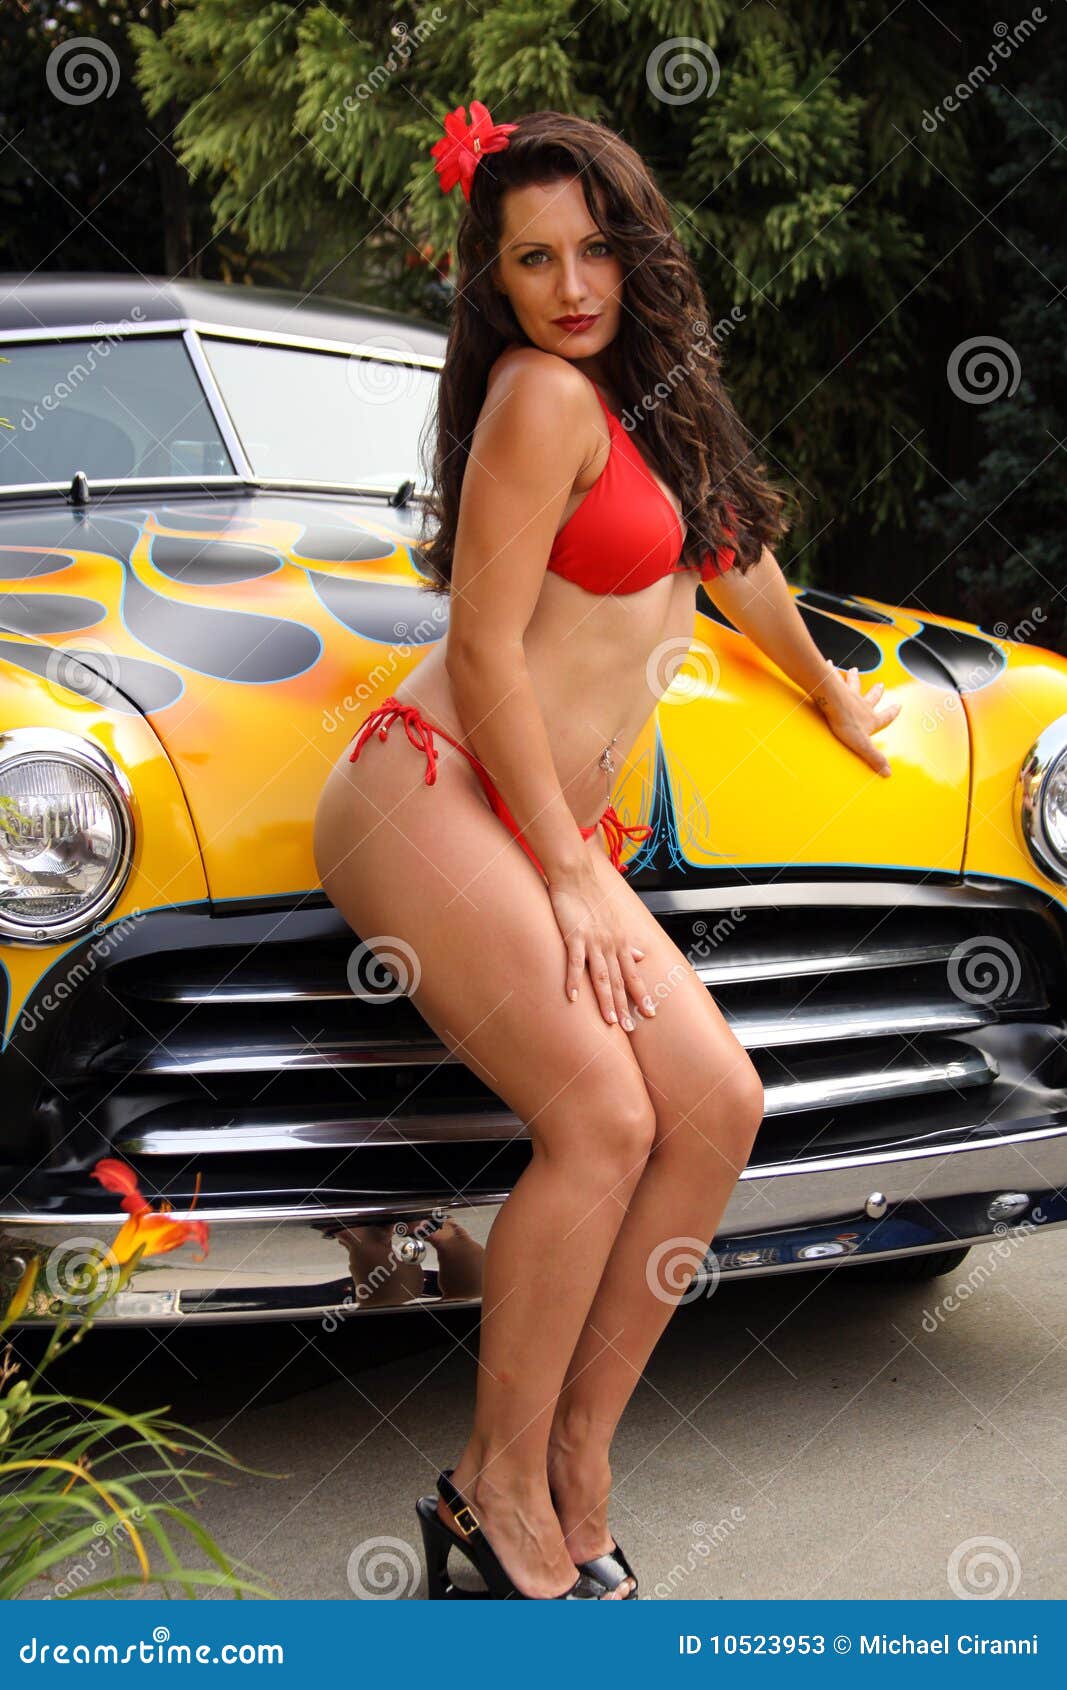 hot rods and hot babes